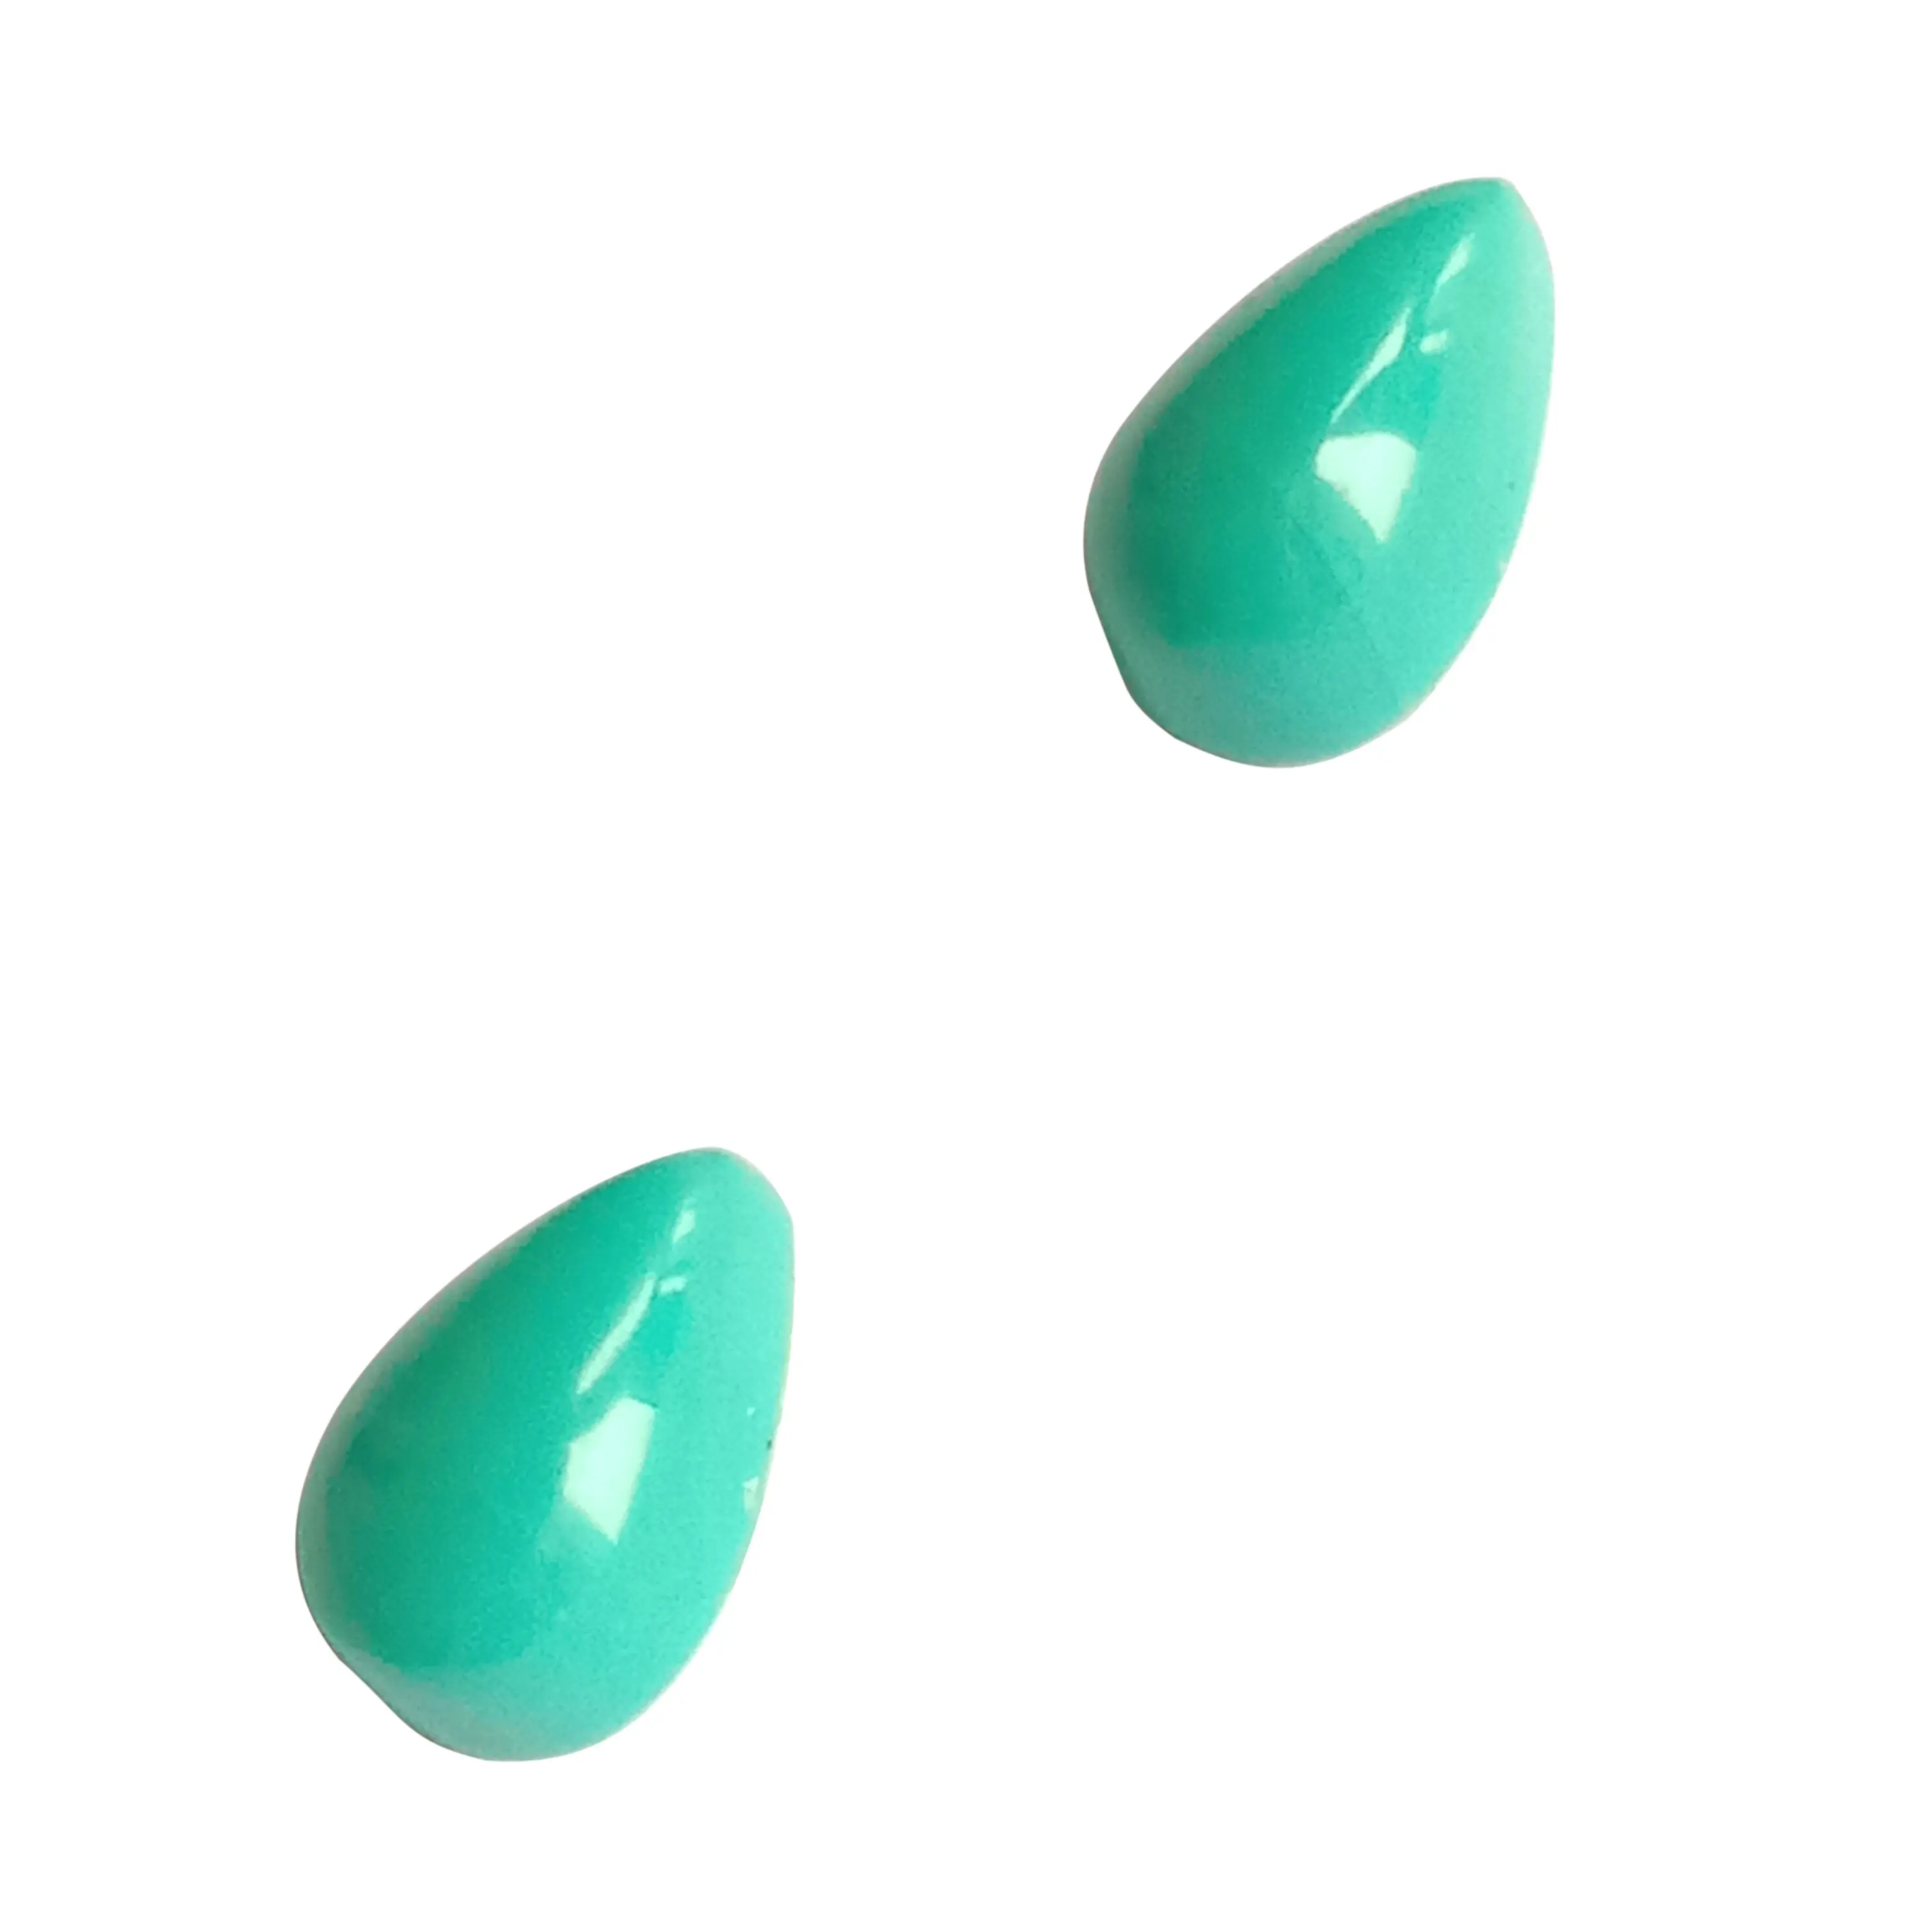 5x3mm Each Turquoise Pear Shaped Smooth Loose Cabochon Lot